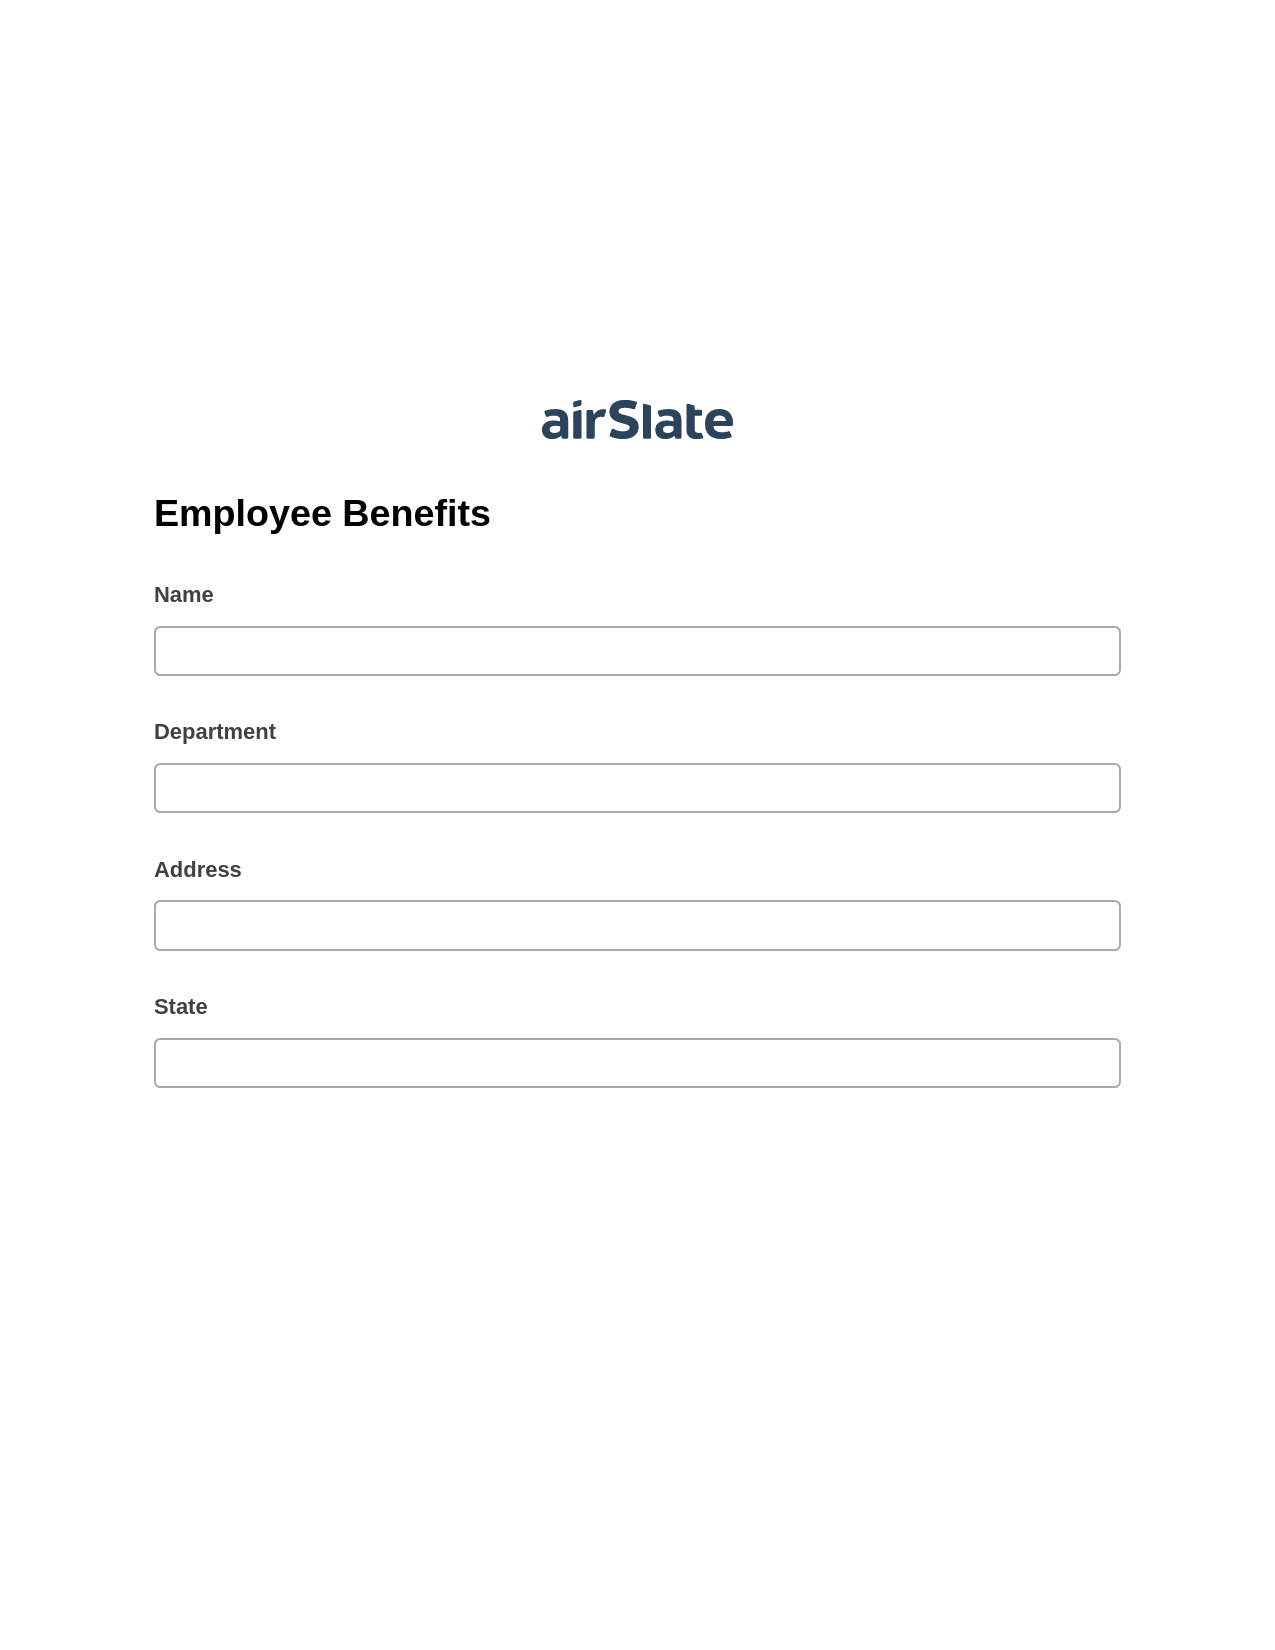 Employee Benefits Pre-fill Dropdown from Airtable, Create slate addon, Export to Smartsheet